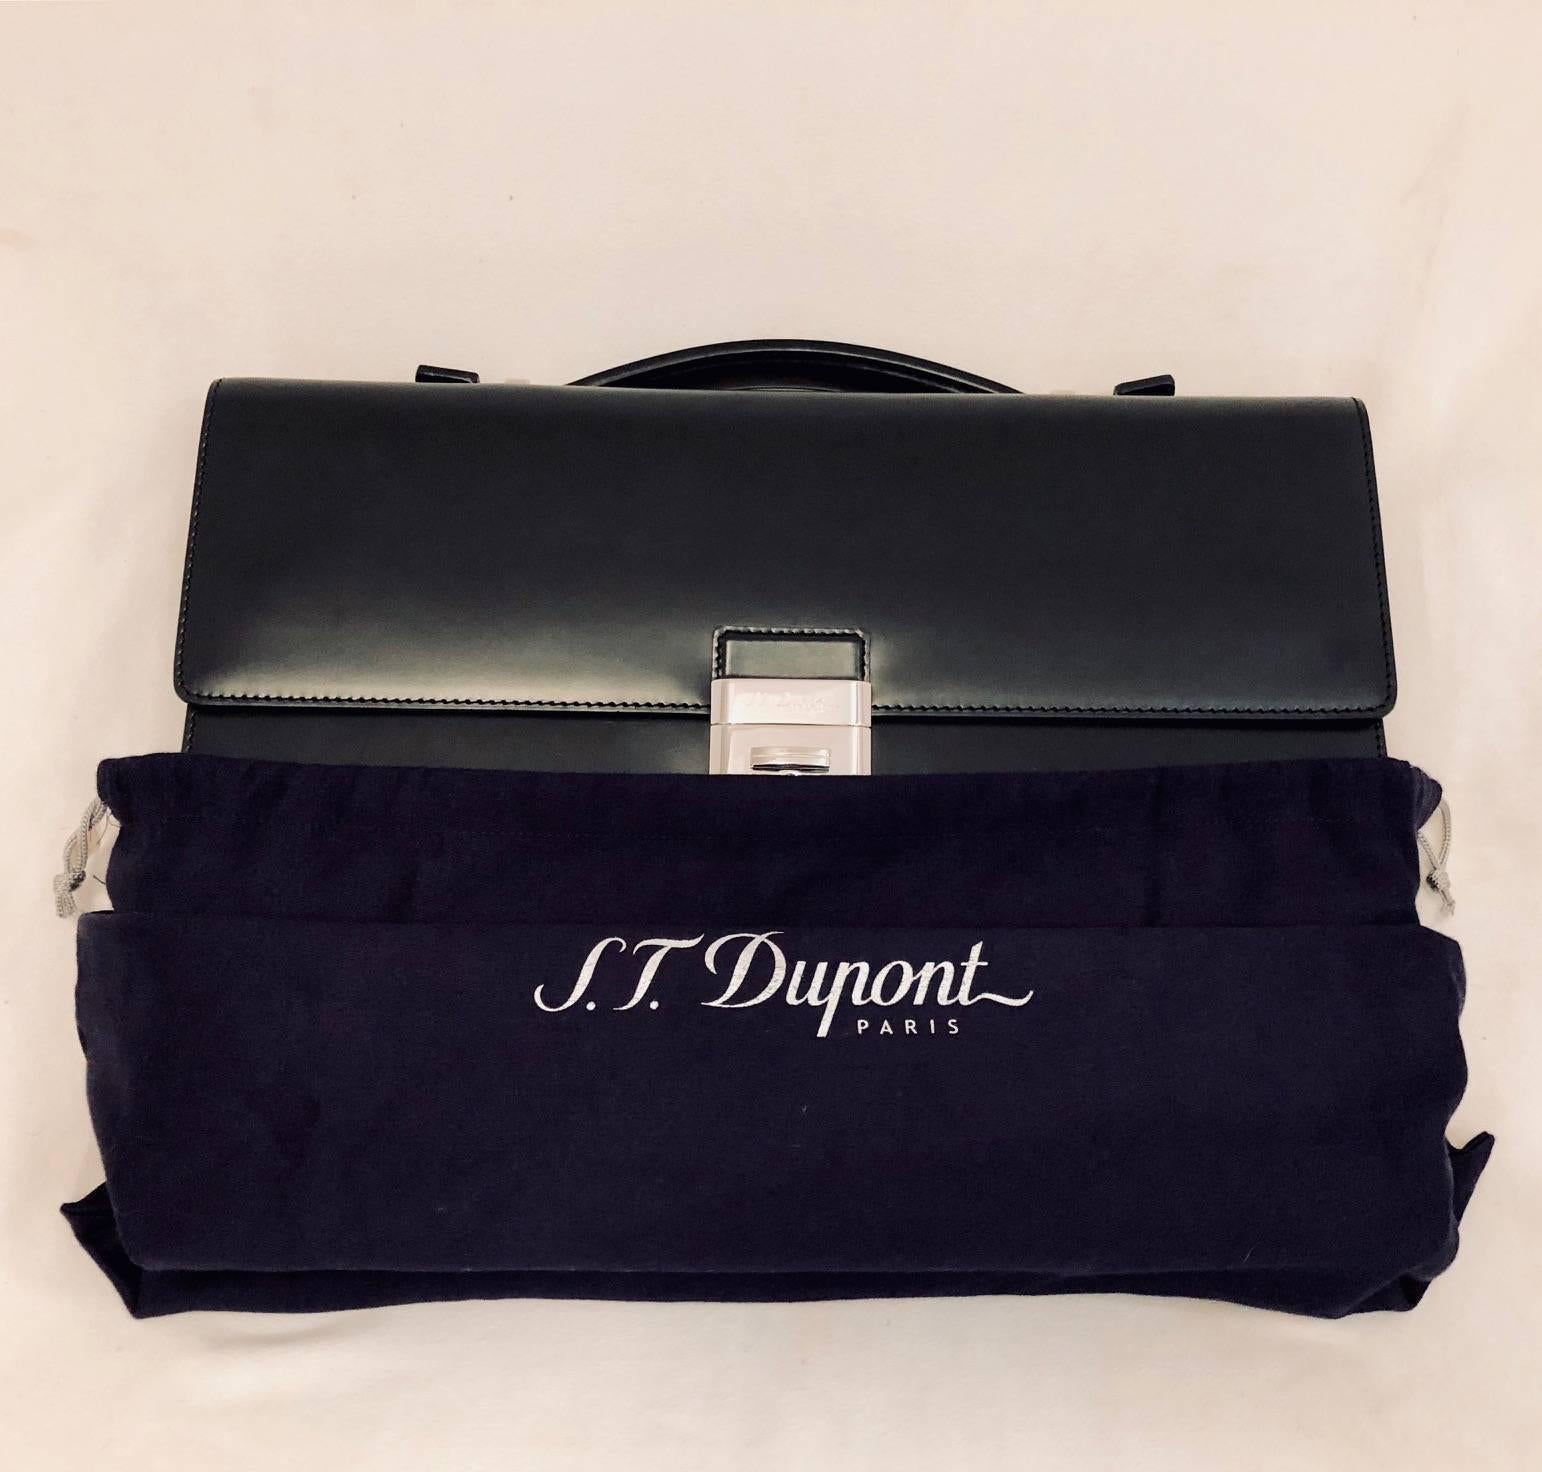 Men's S.T. Dupont Leather Briefcase, 1 Gusset - New For Sale 3